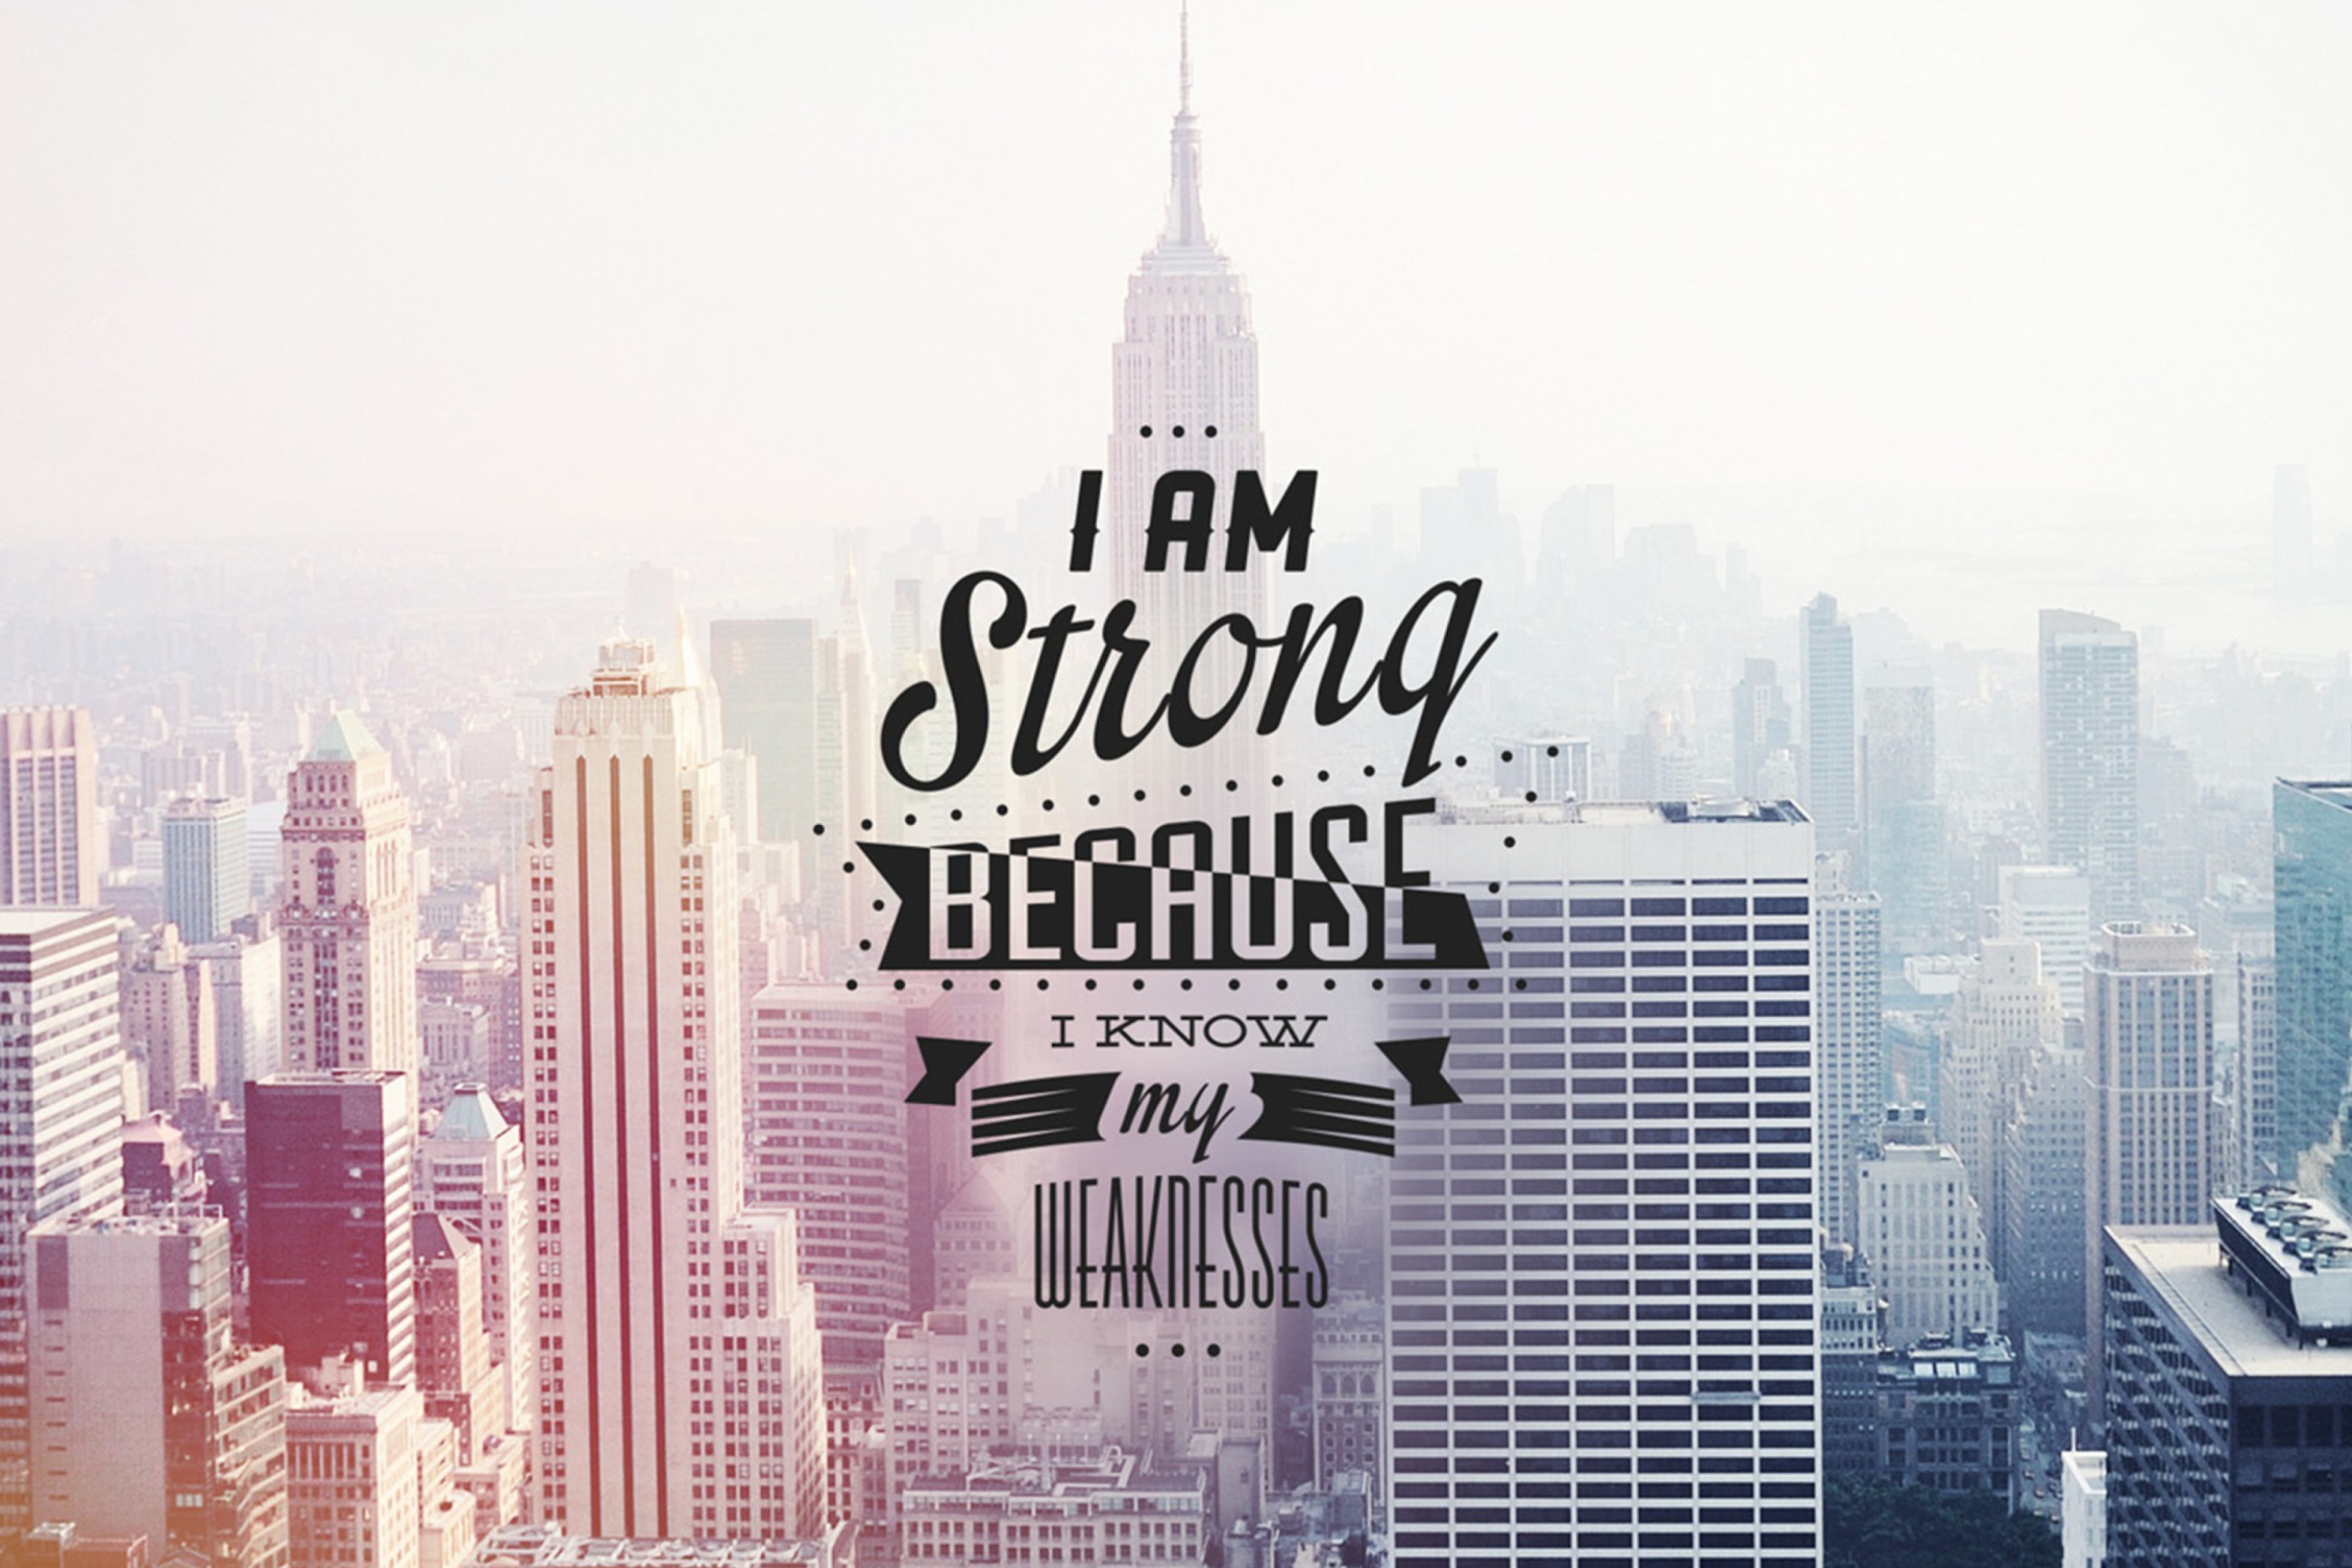 Das I am strong because i know my weakness Wallpaper 2880x1920